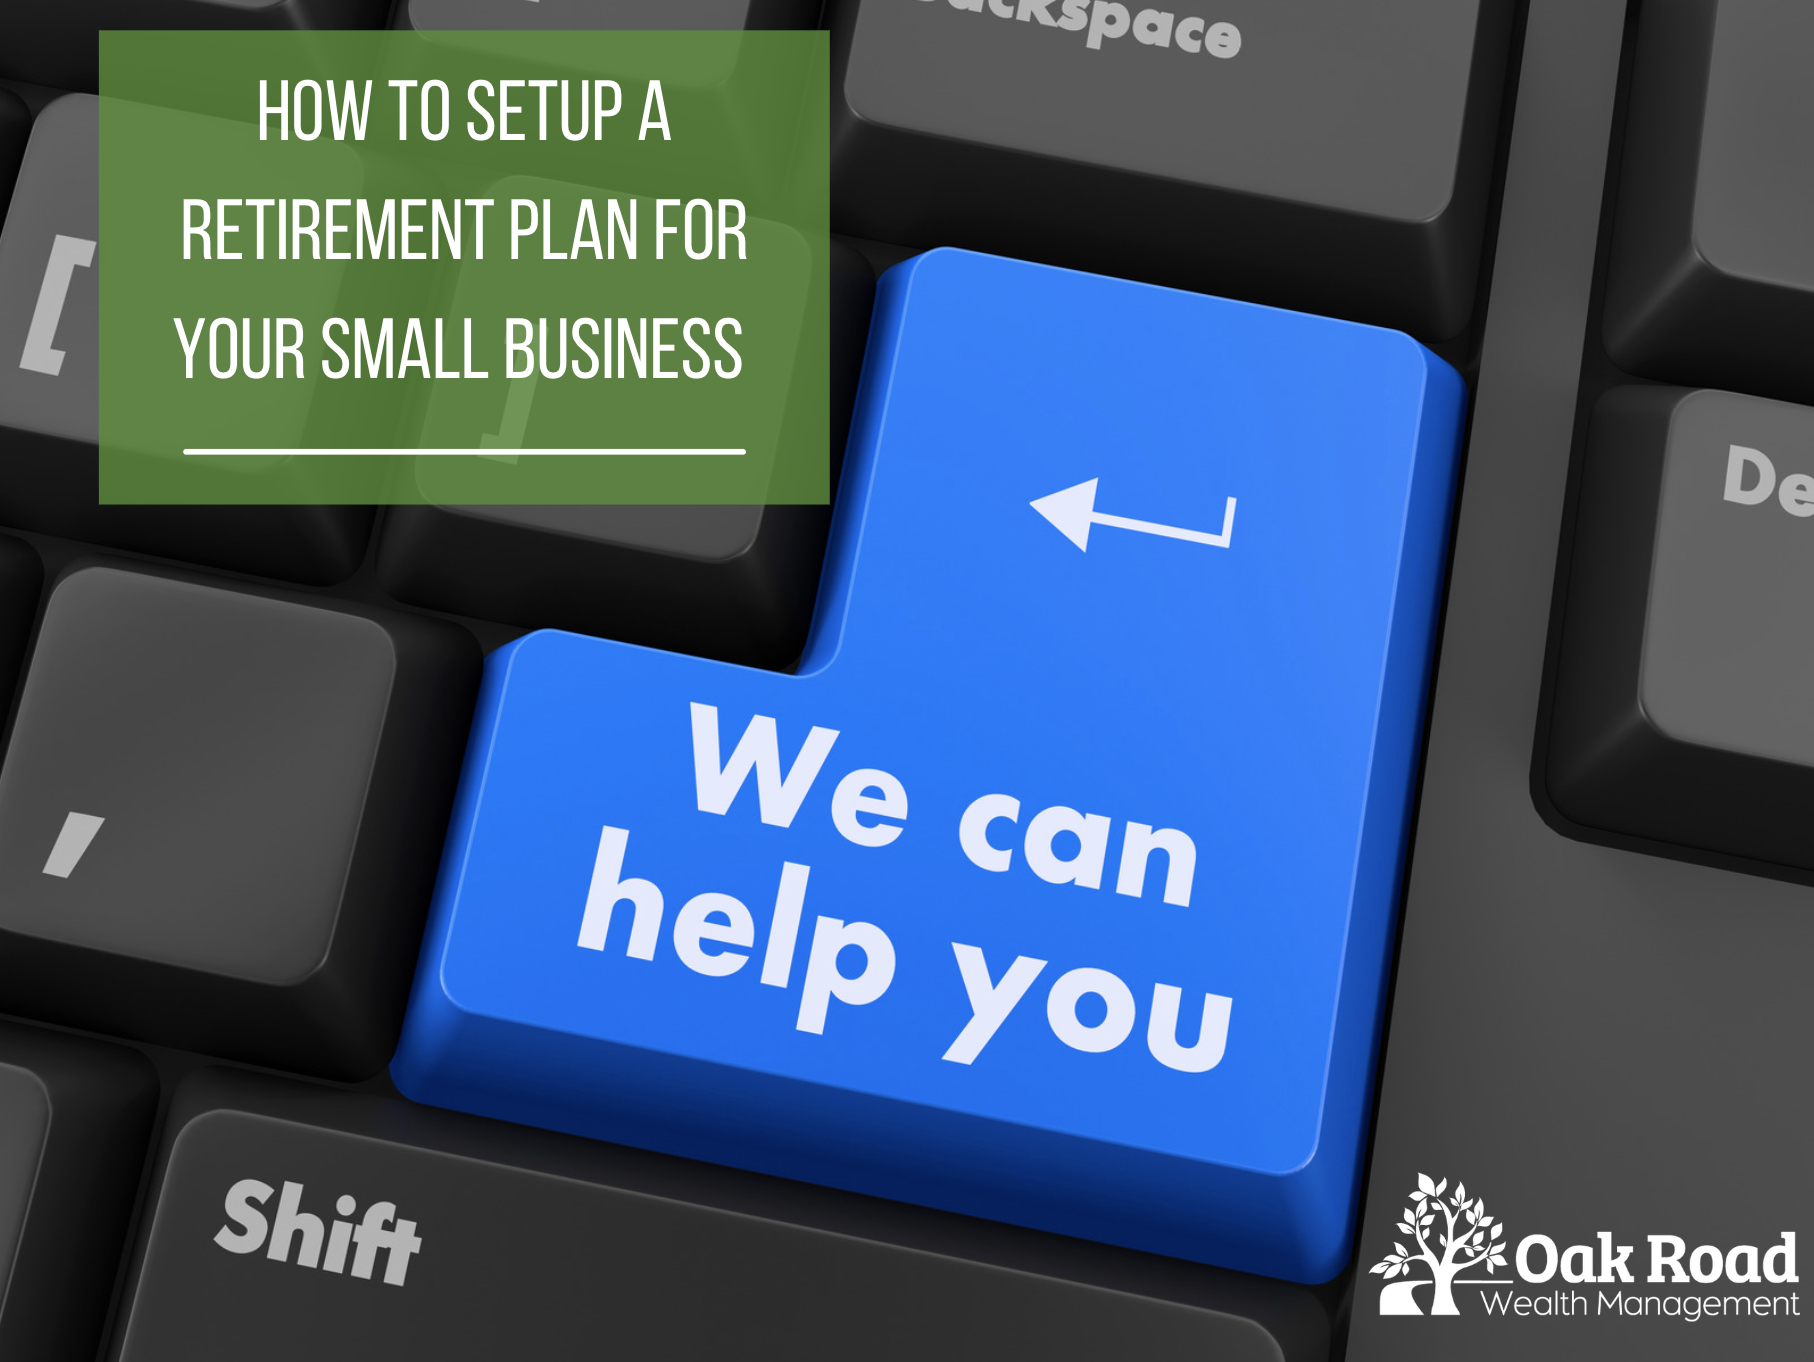 HOW TO SETUP A RETIREMENT PLAN FOR YOUR SMALL BUSINESS